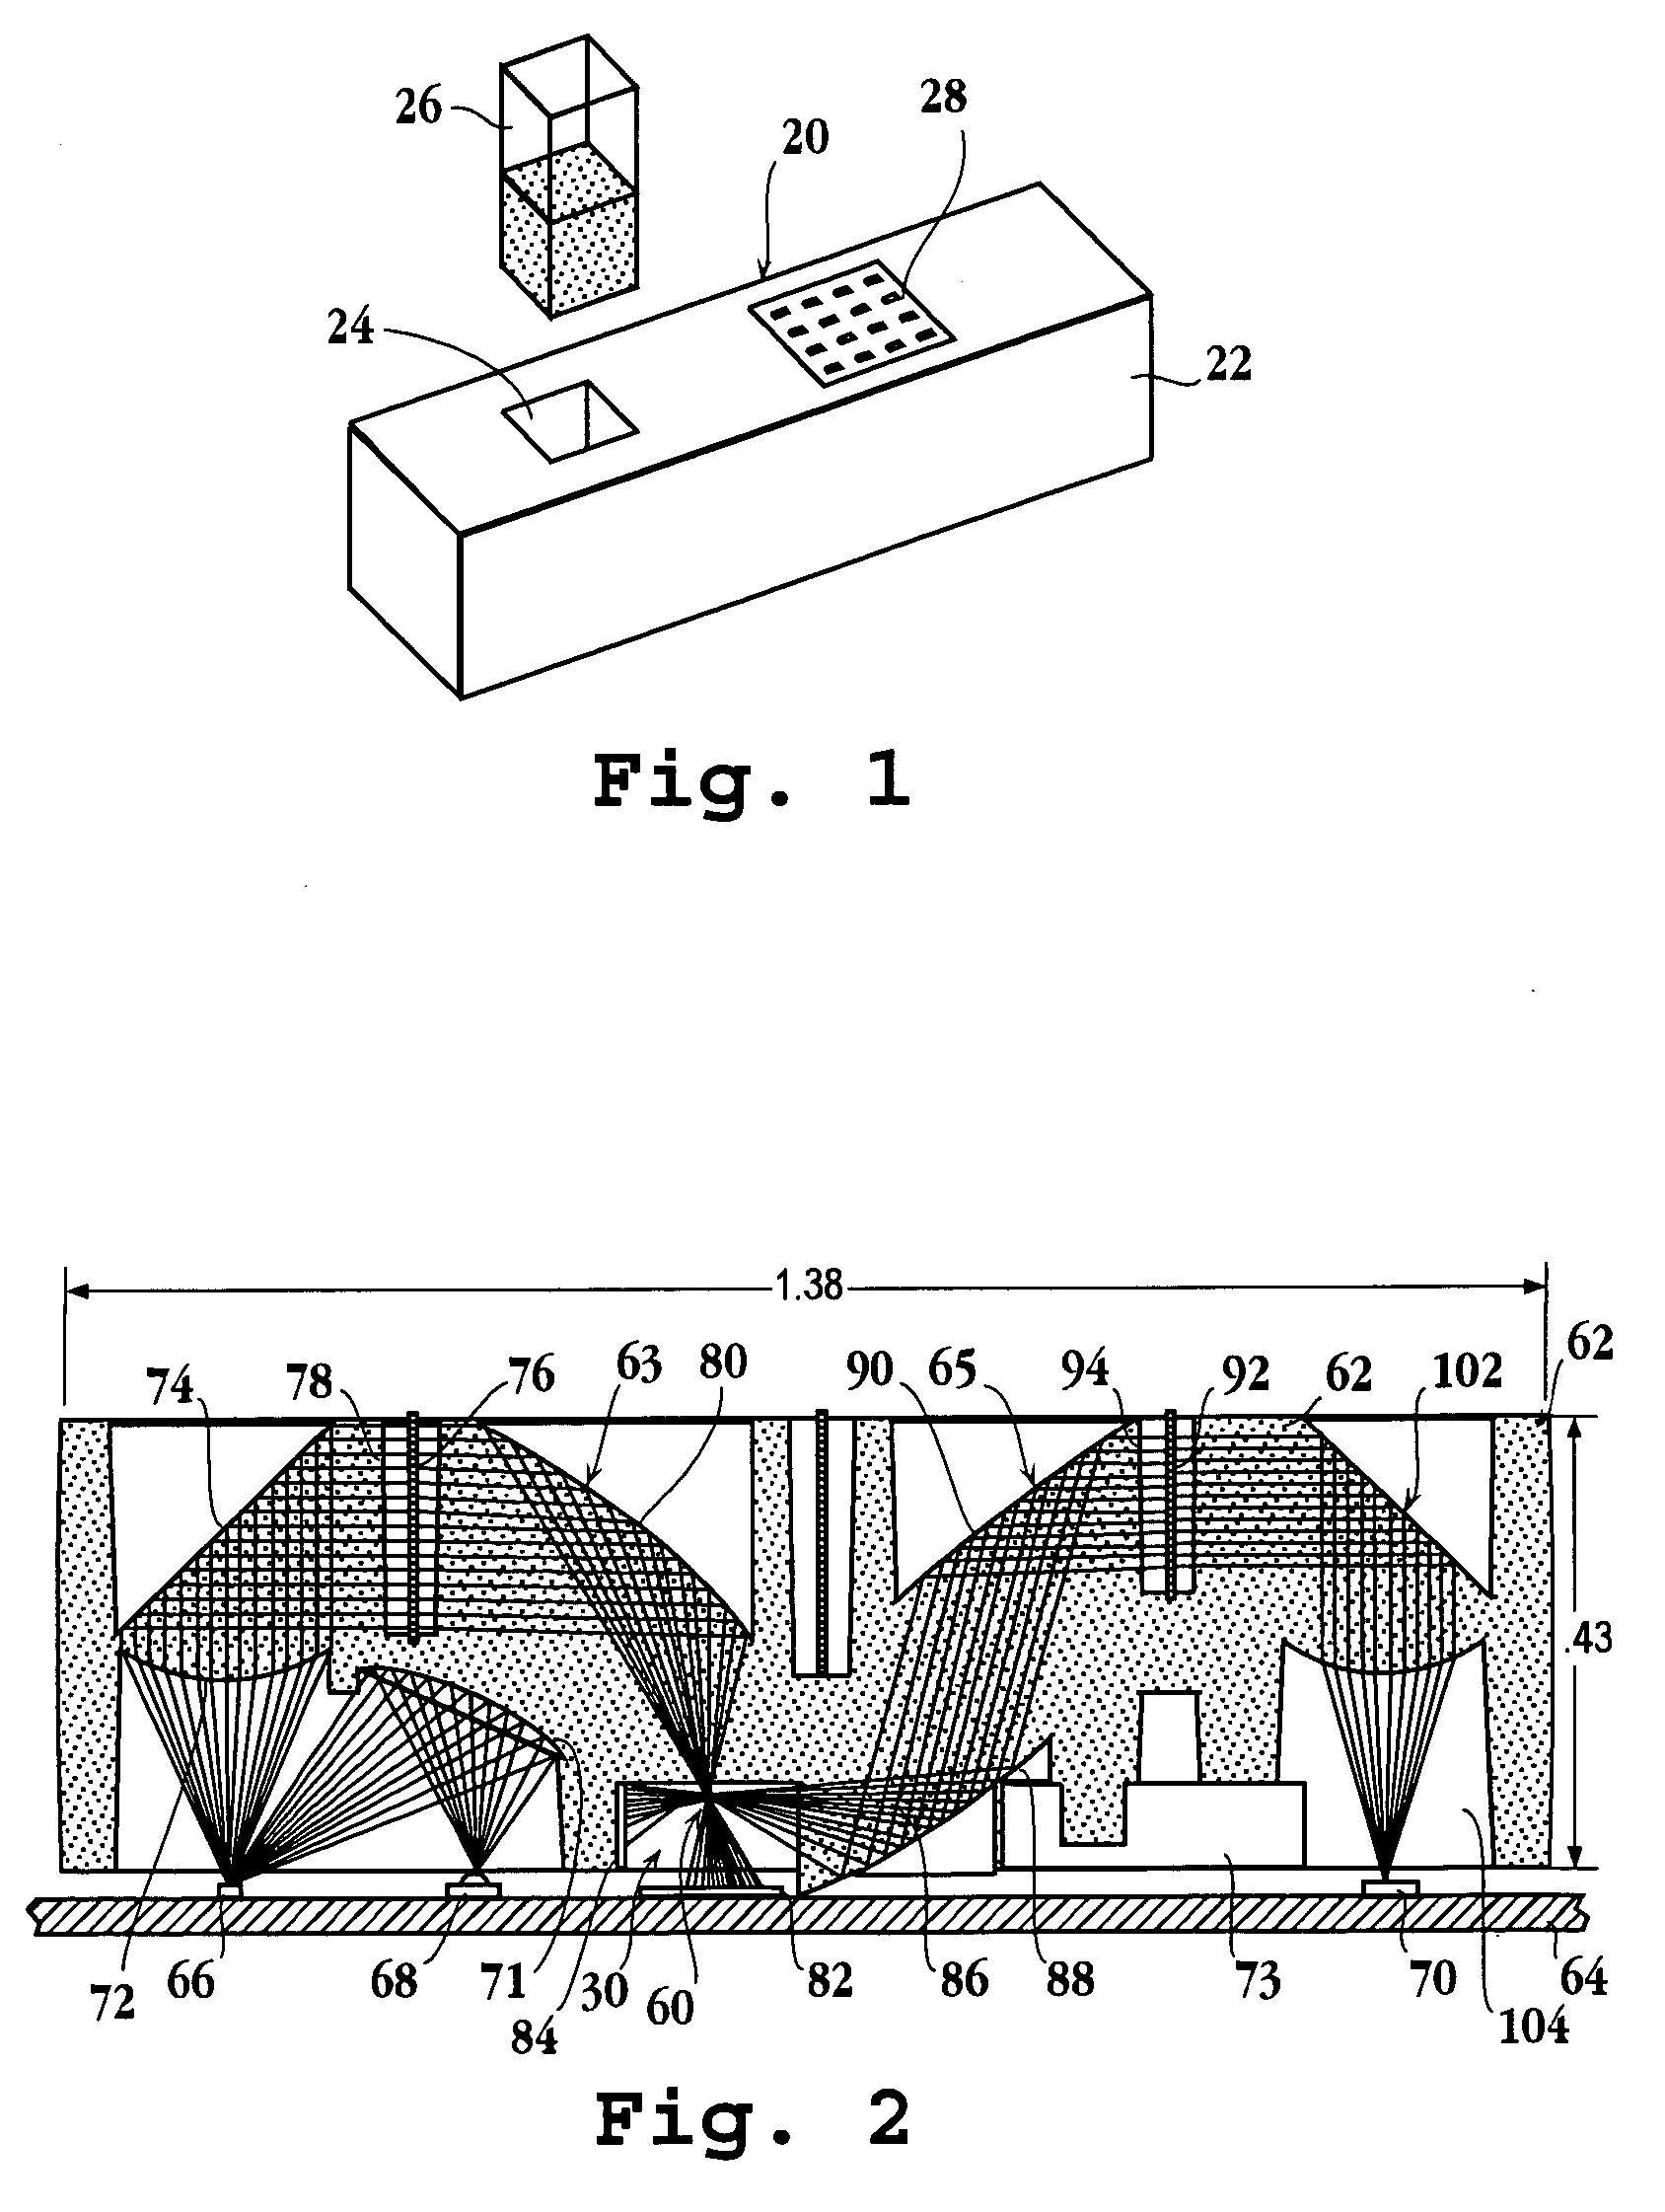 Multilens optical assembly for a diagnostic device